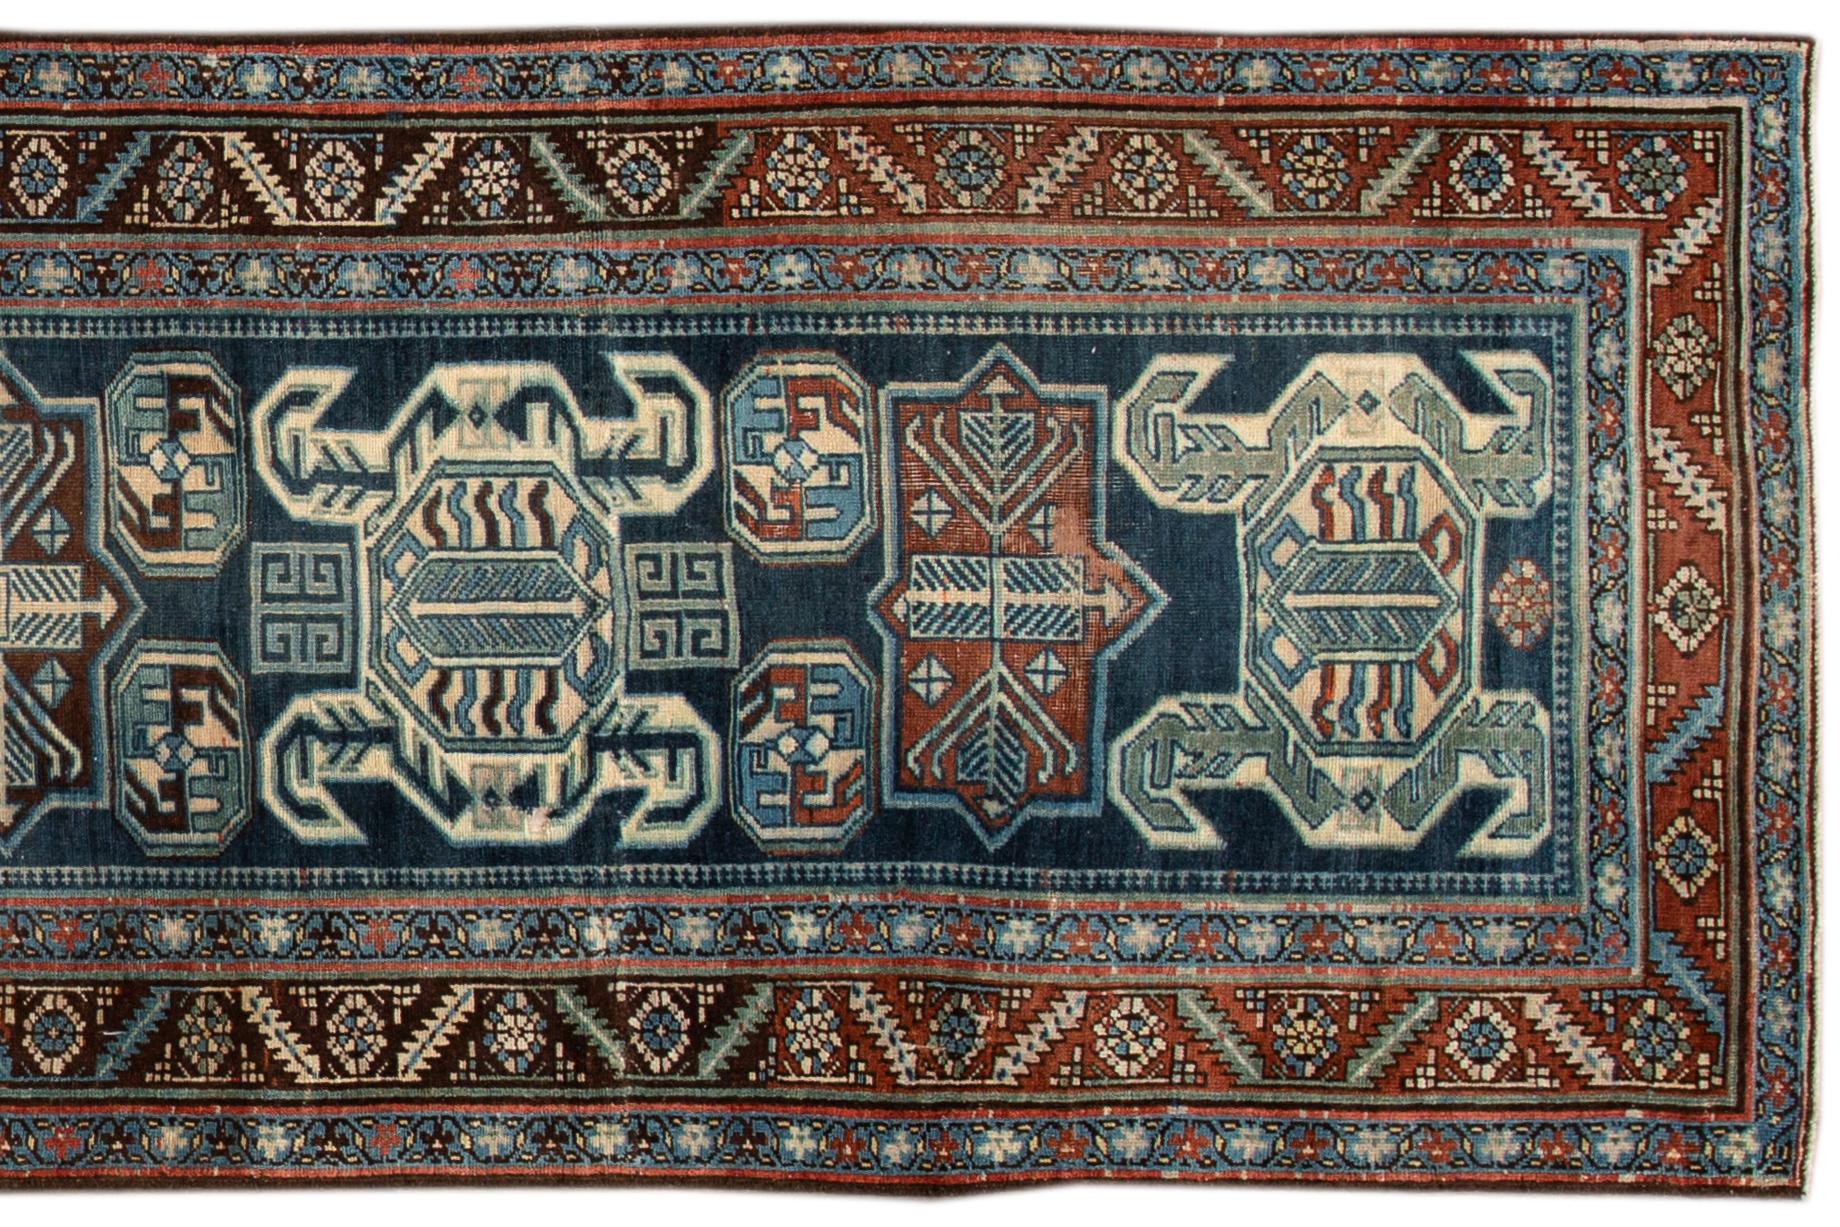 Beautiful hand knotted antique Persian wool runner rug, with a blue field, brown and ivory accents in a geometric multi medallion design. 

This rug measures 3' 5